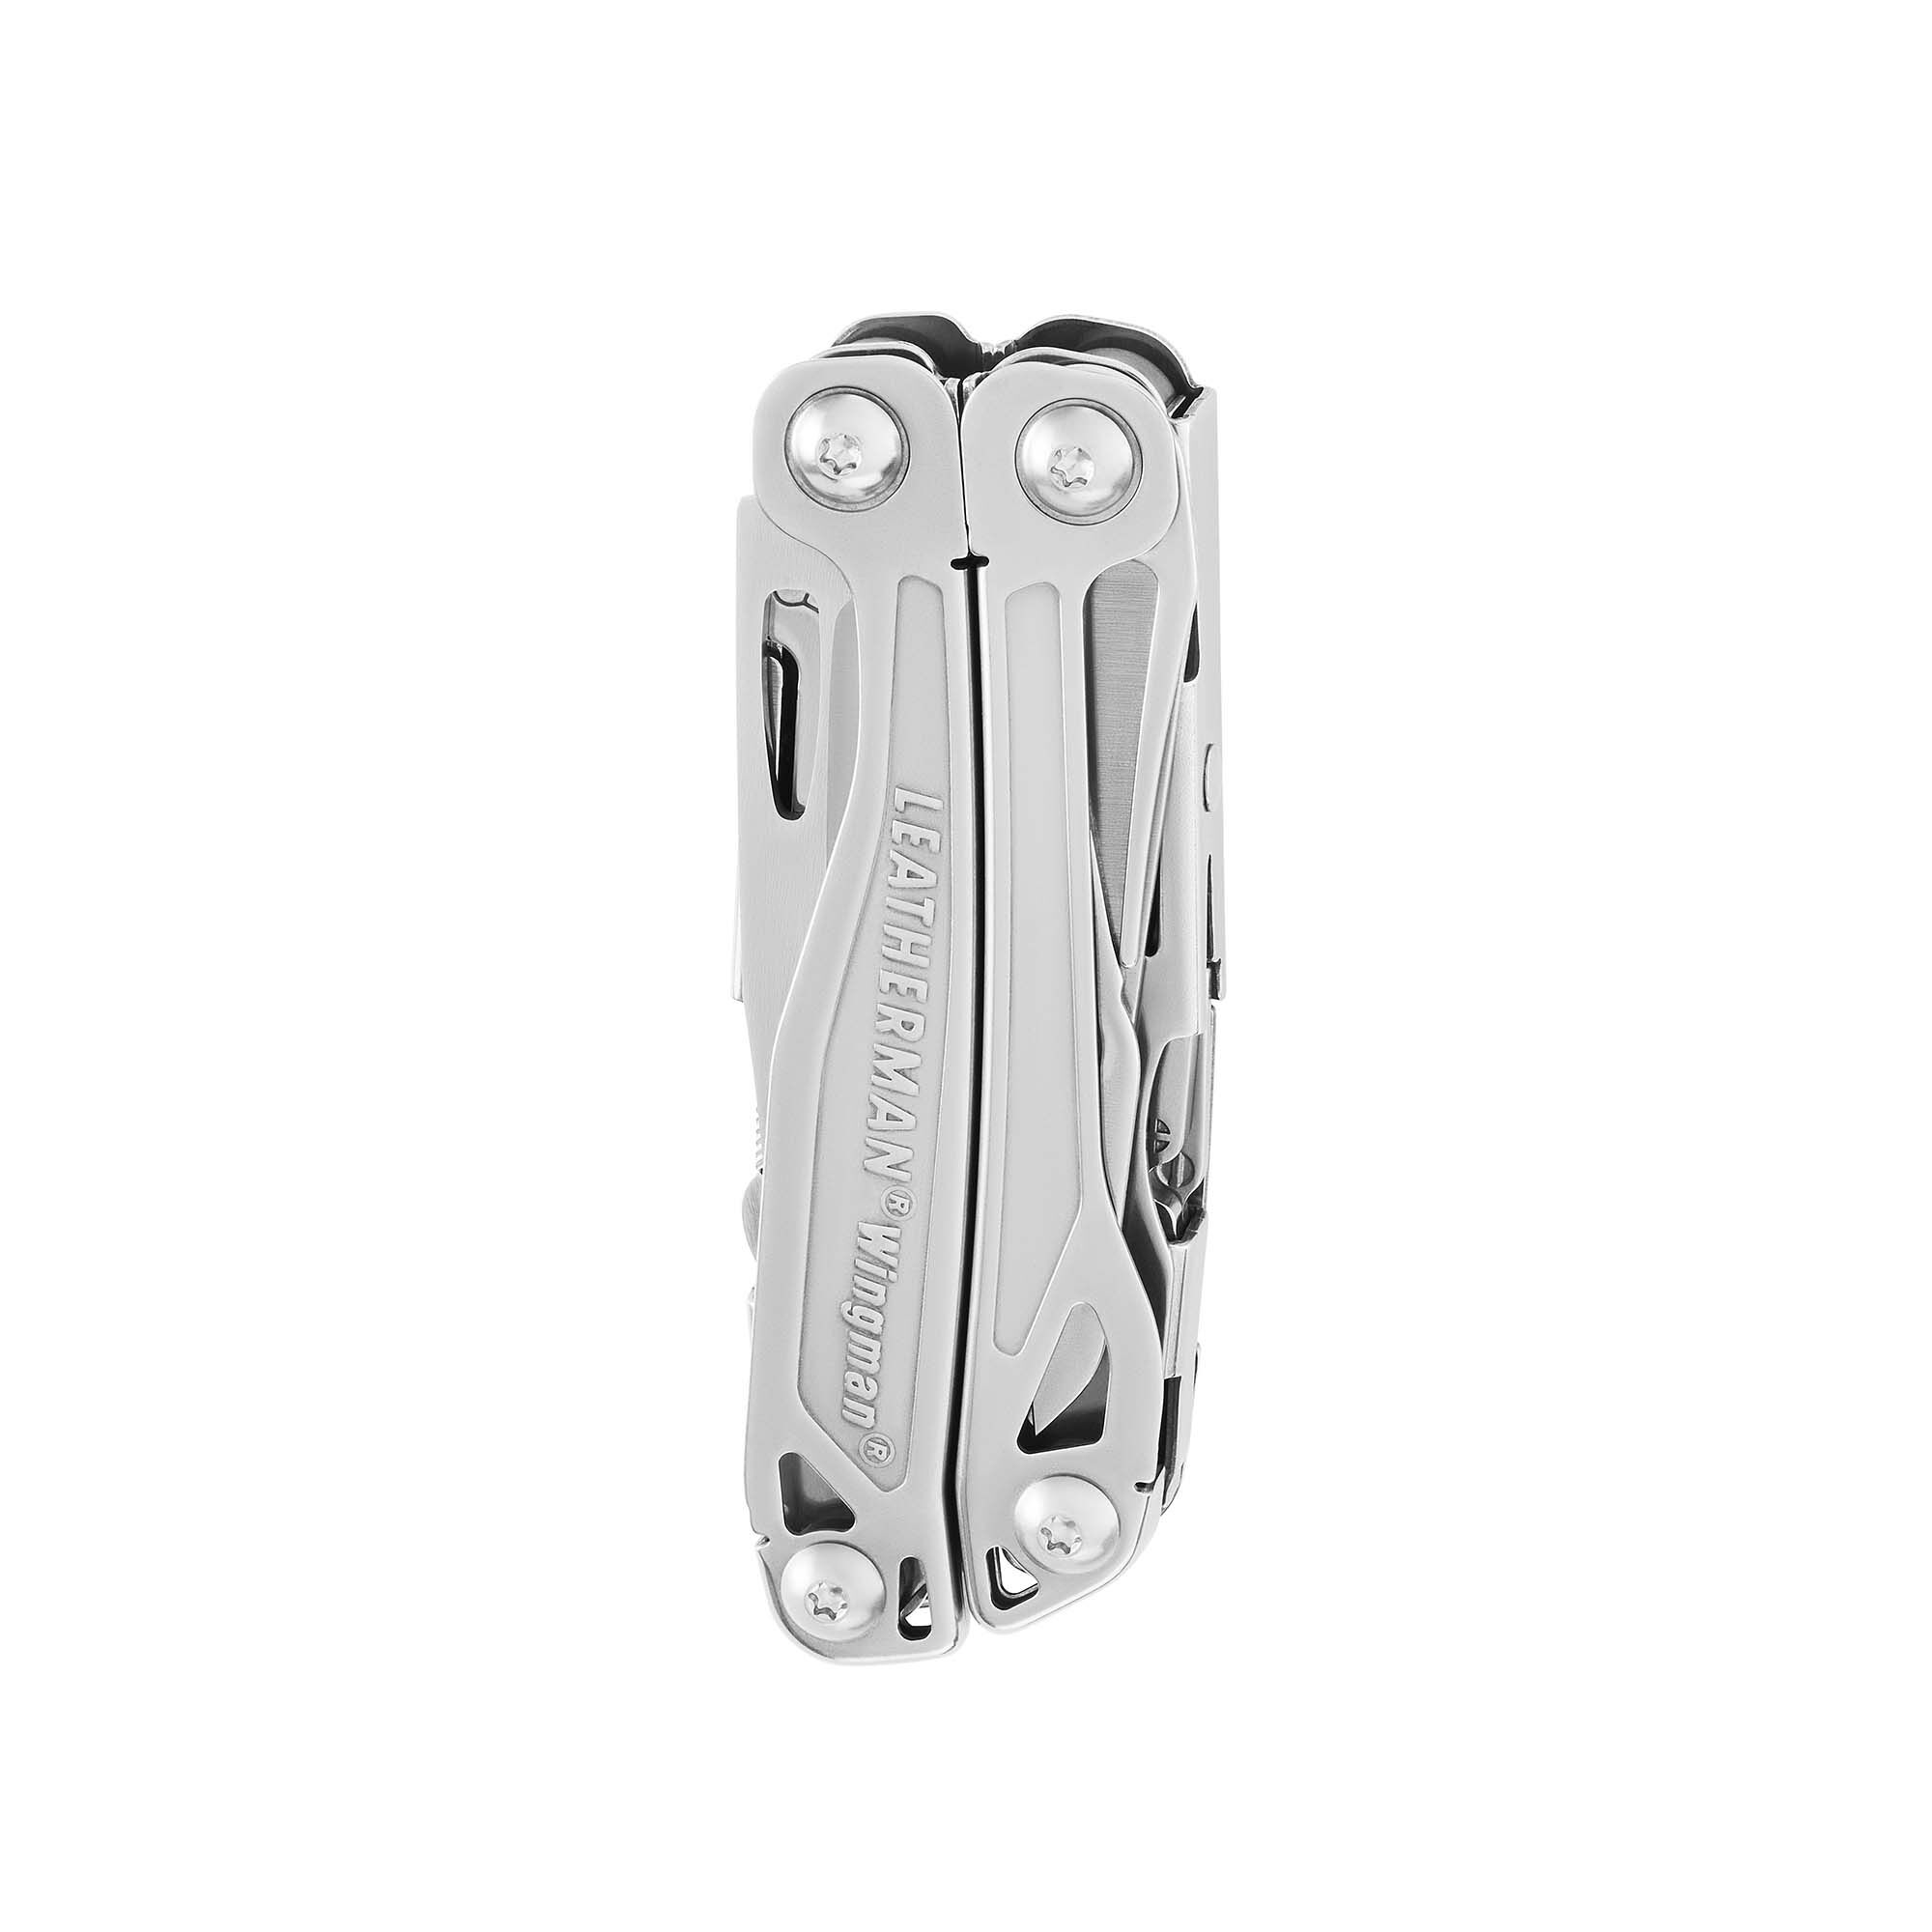 Gear Review: Leatherman Signal and Free T4